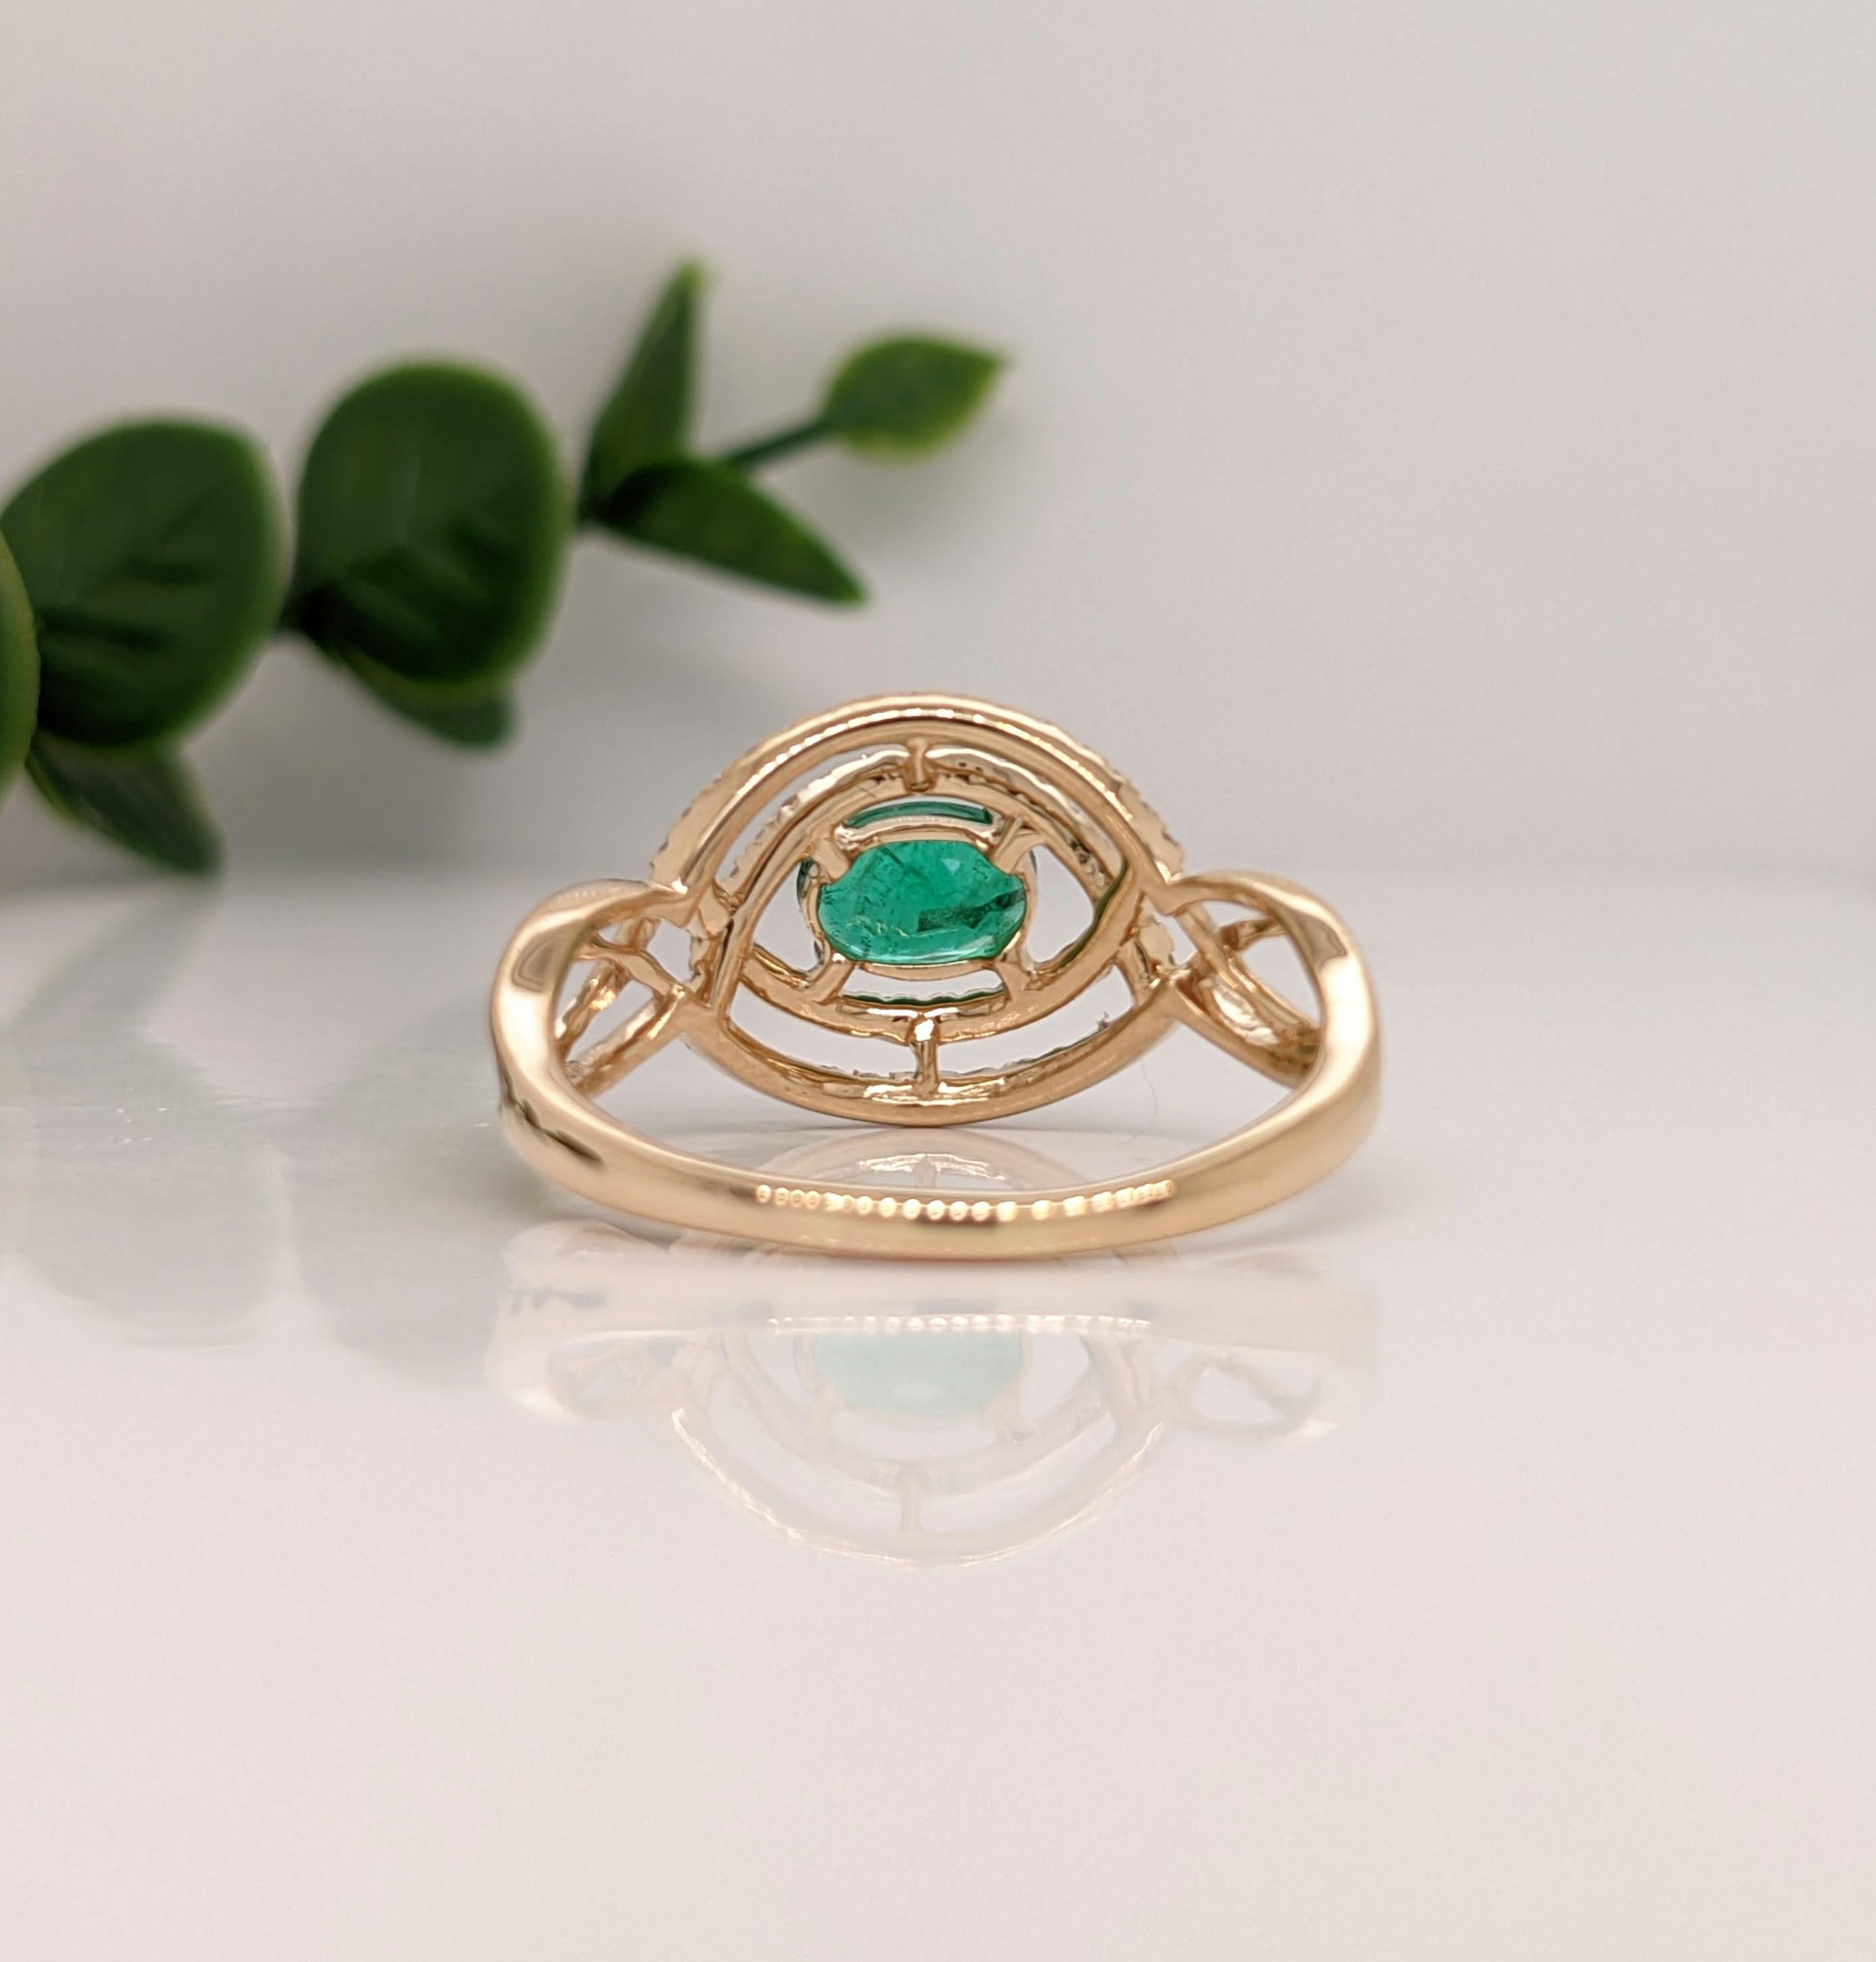 Oval Cut Emerald Ring w Celtic Shank and Diamonds in Solid 14k Yellow Gold Oval 6x4mm